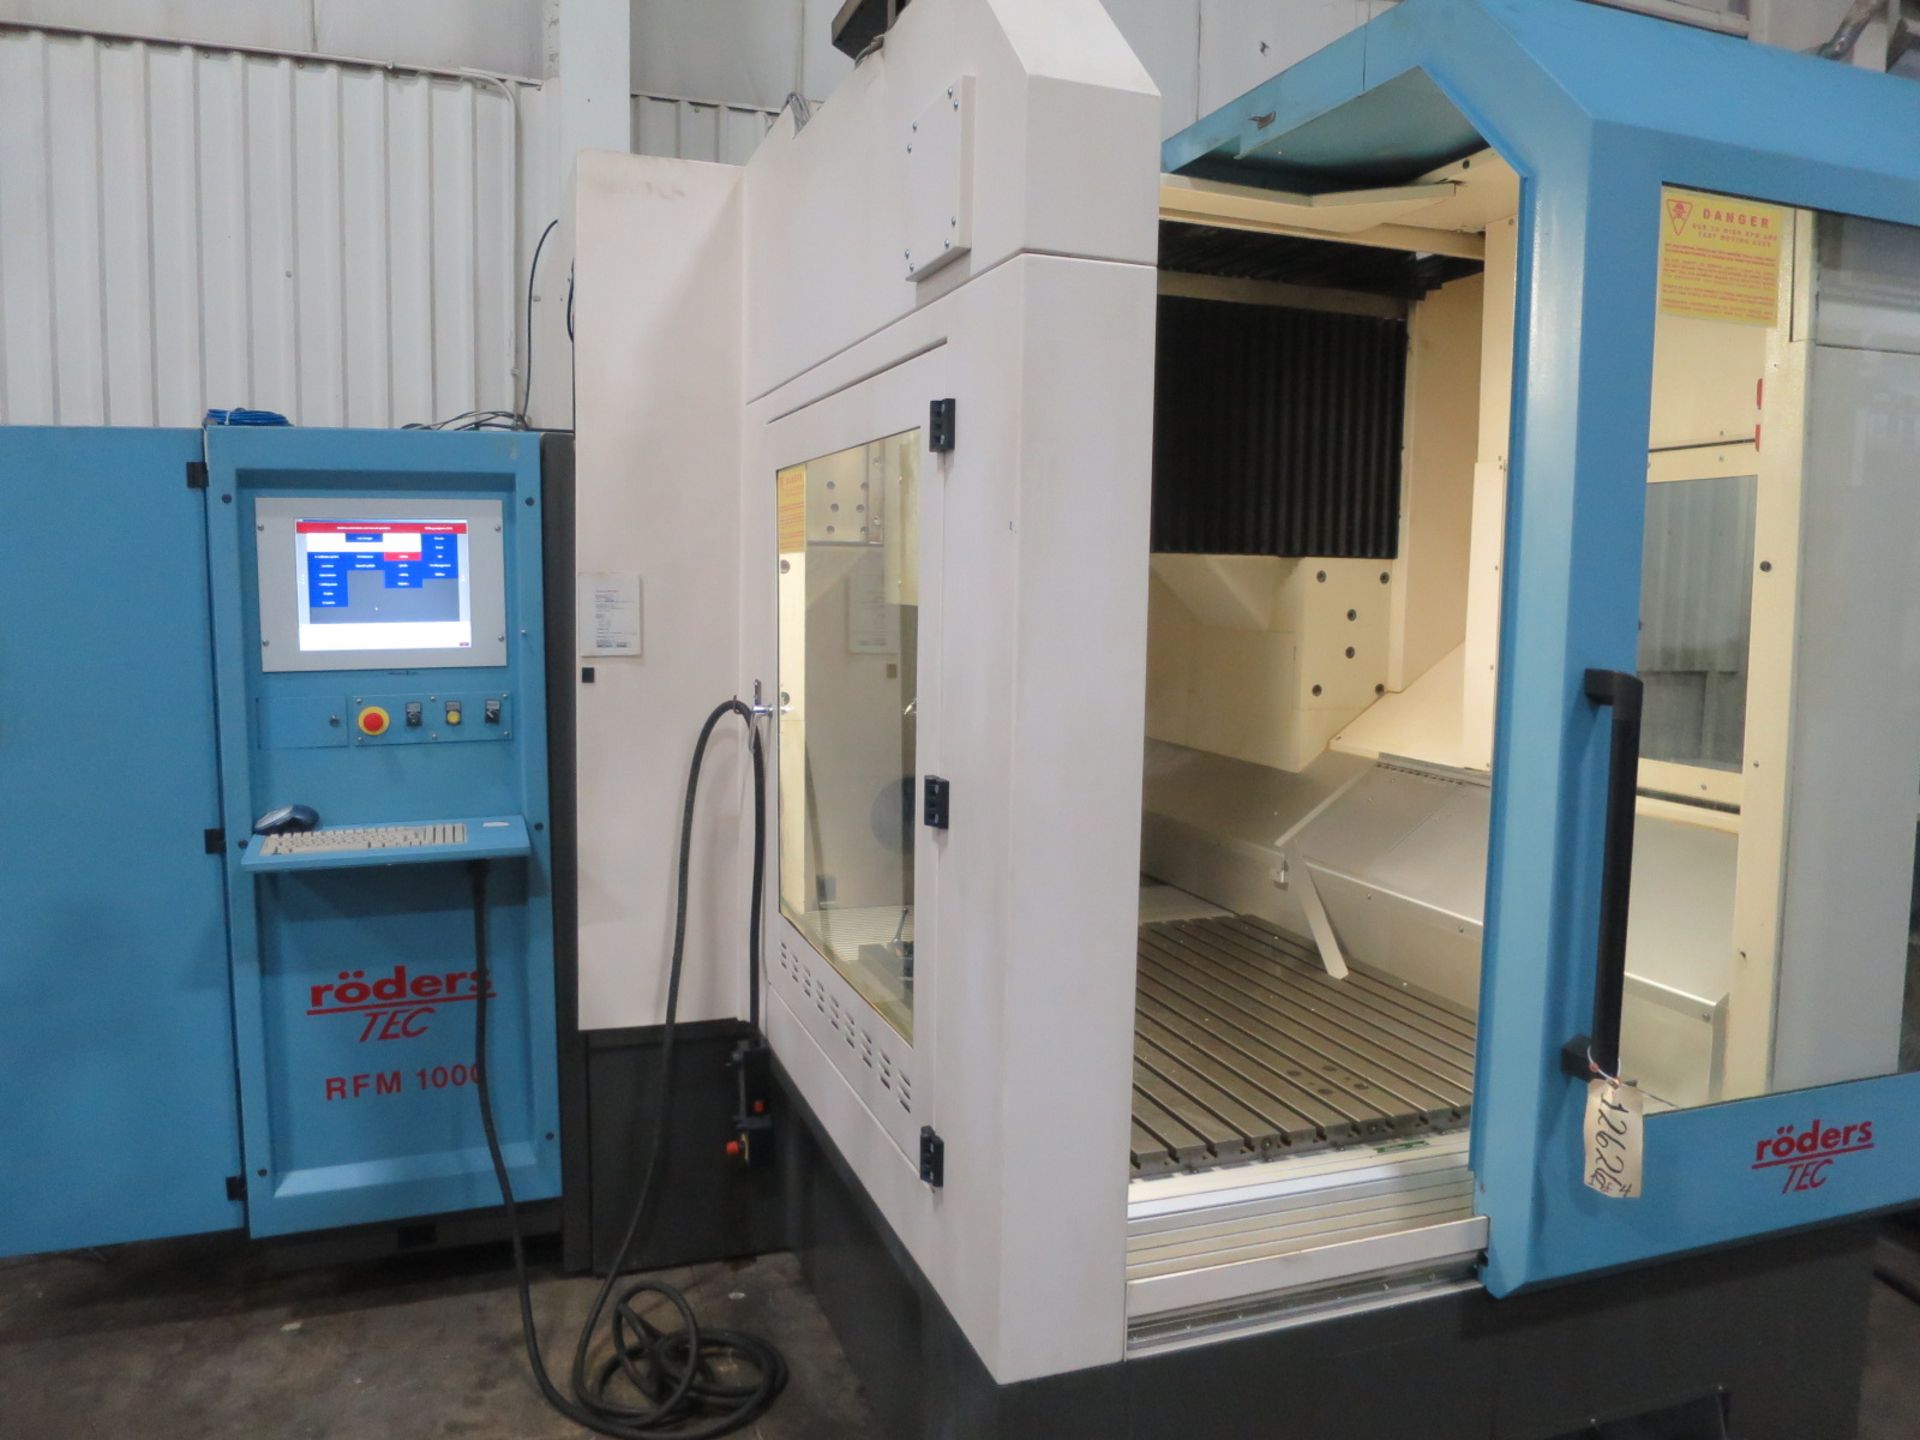 RODERS RFM 1000 CNC 3-AXIS VERTICAL MACHINING CENTER, - Image 2 of 16